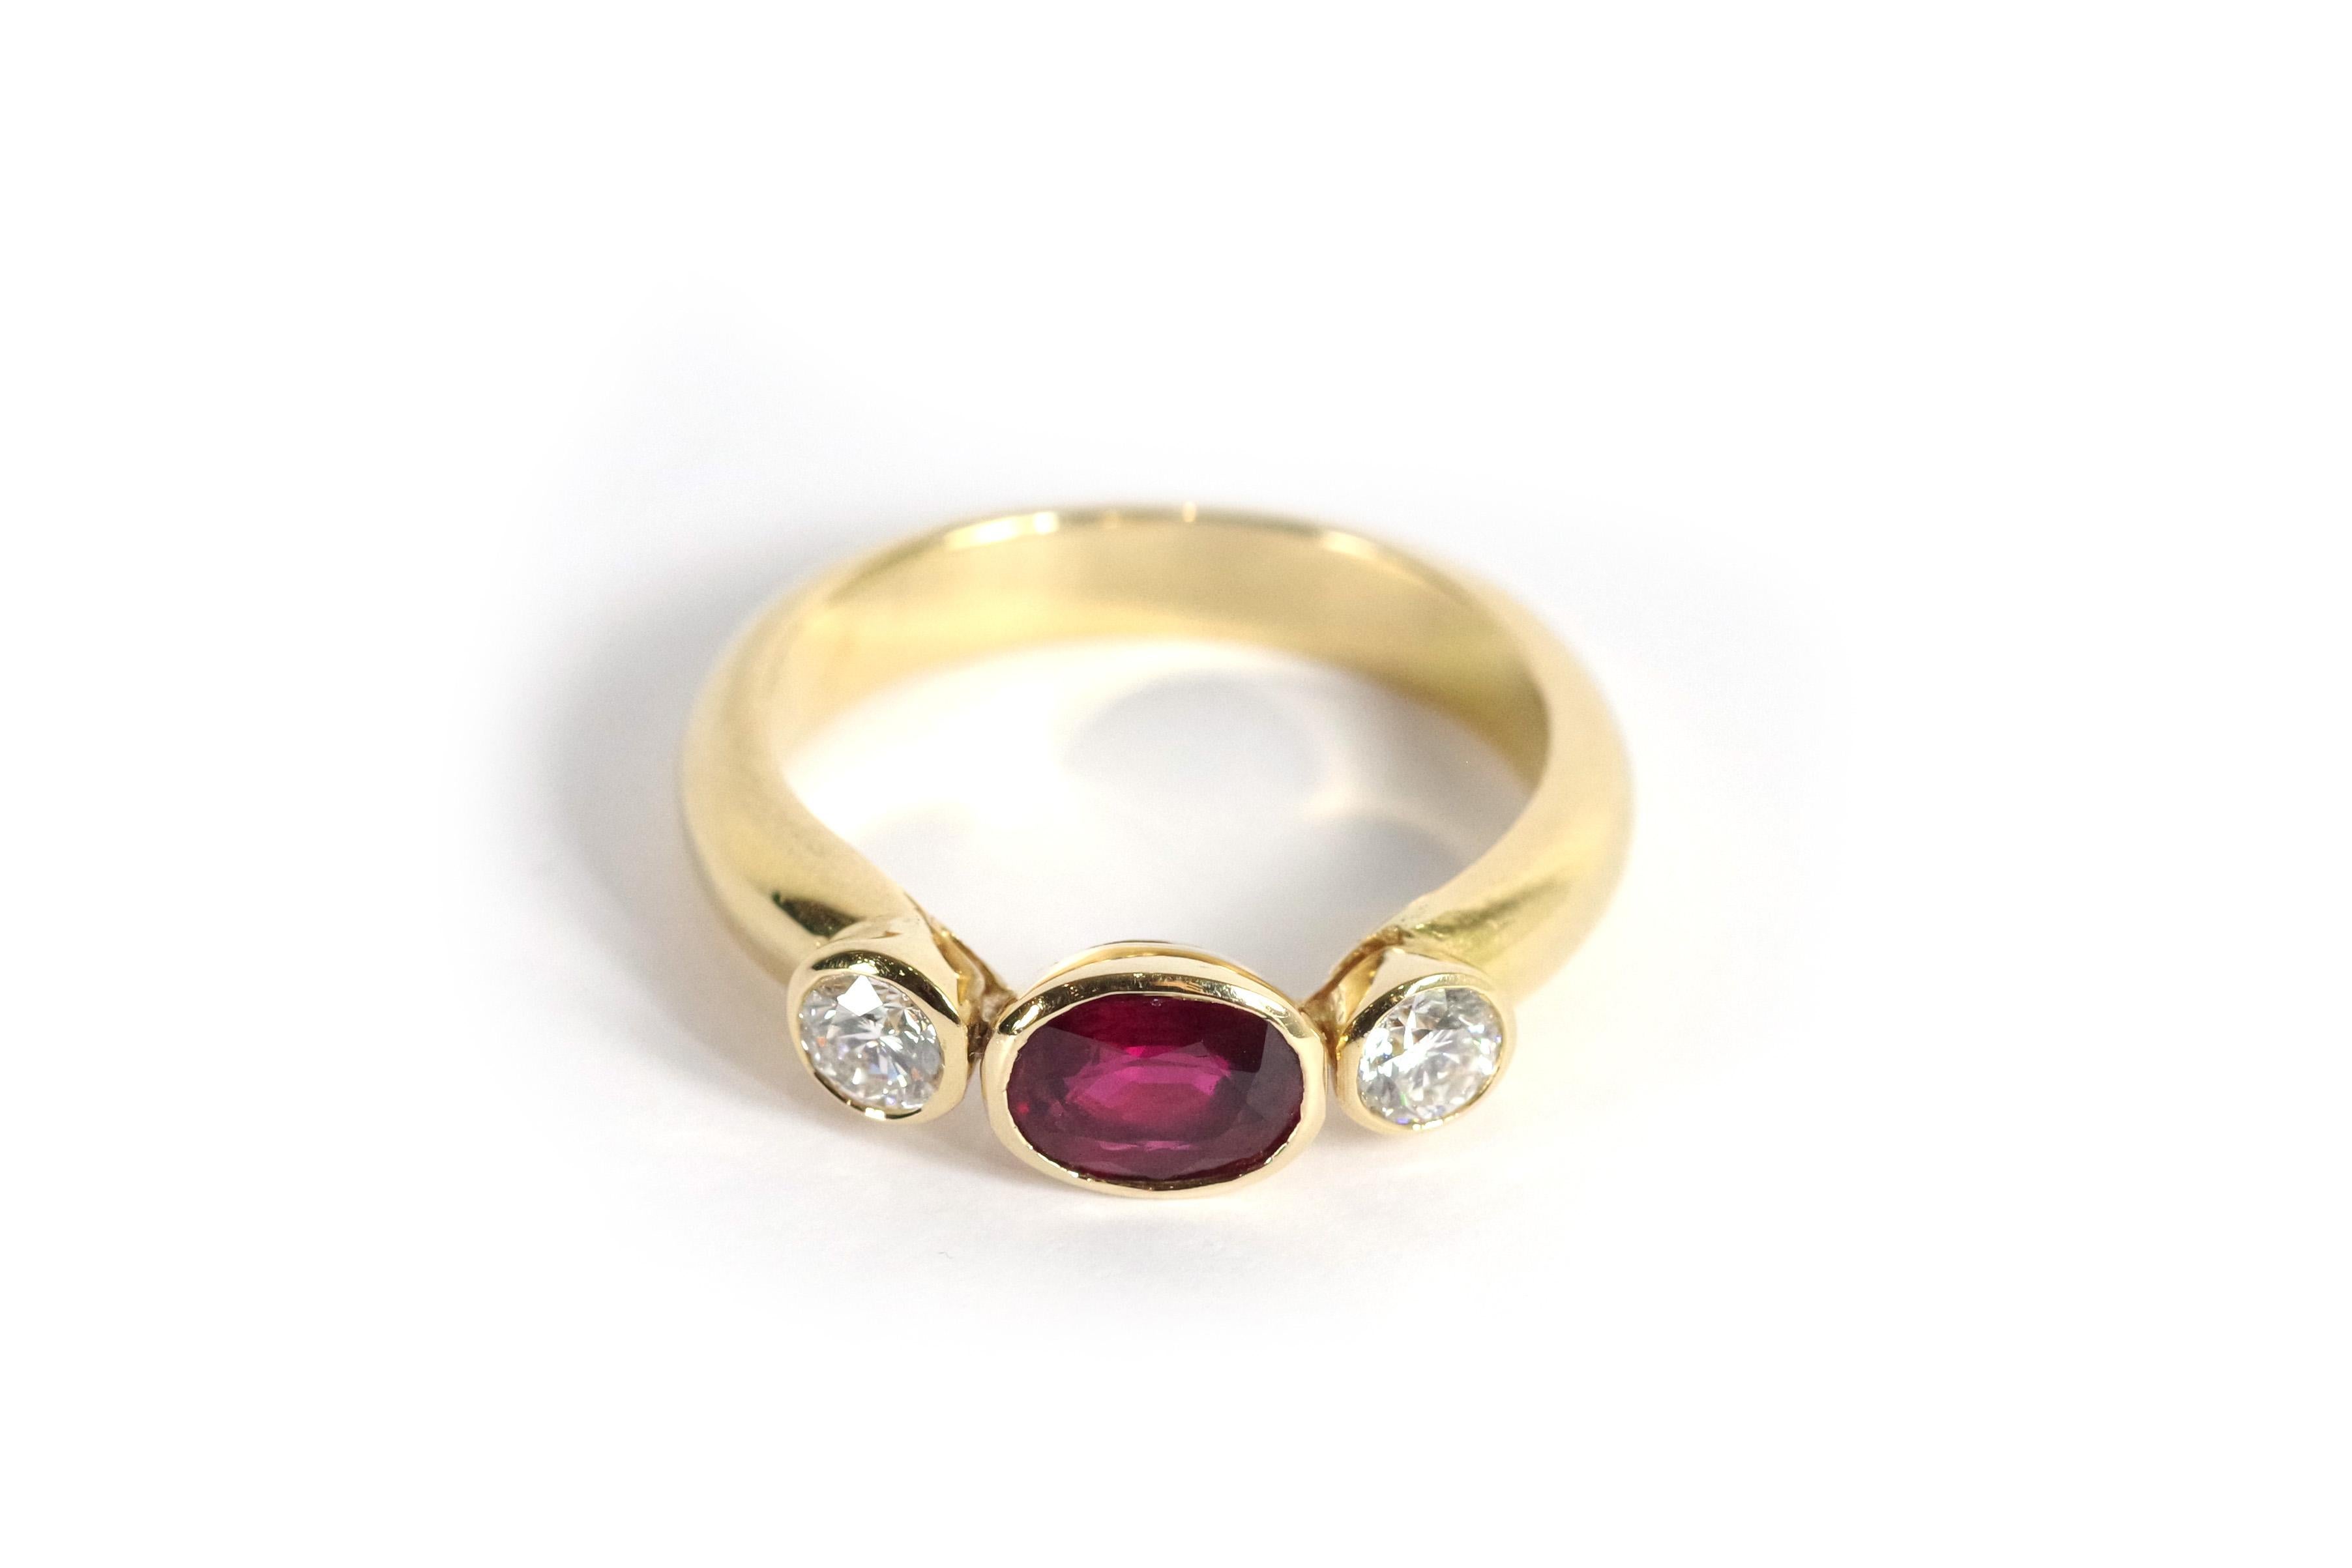 Trilogy ruby and diamond ring in 18-karat yellow gold. In the centre, a beautiful oval ruby with velvety red, weighing approximately 1.05 carats. The ruby is natural, framed by two brilliant-cut diamonds of 0.25 carats each. Vintage ring from the